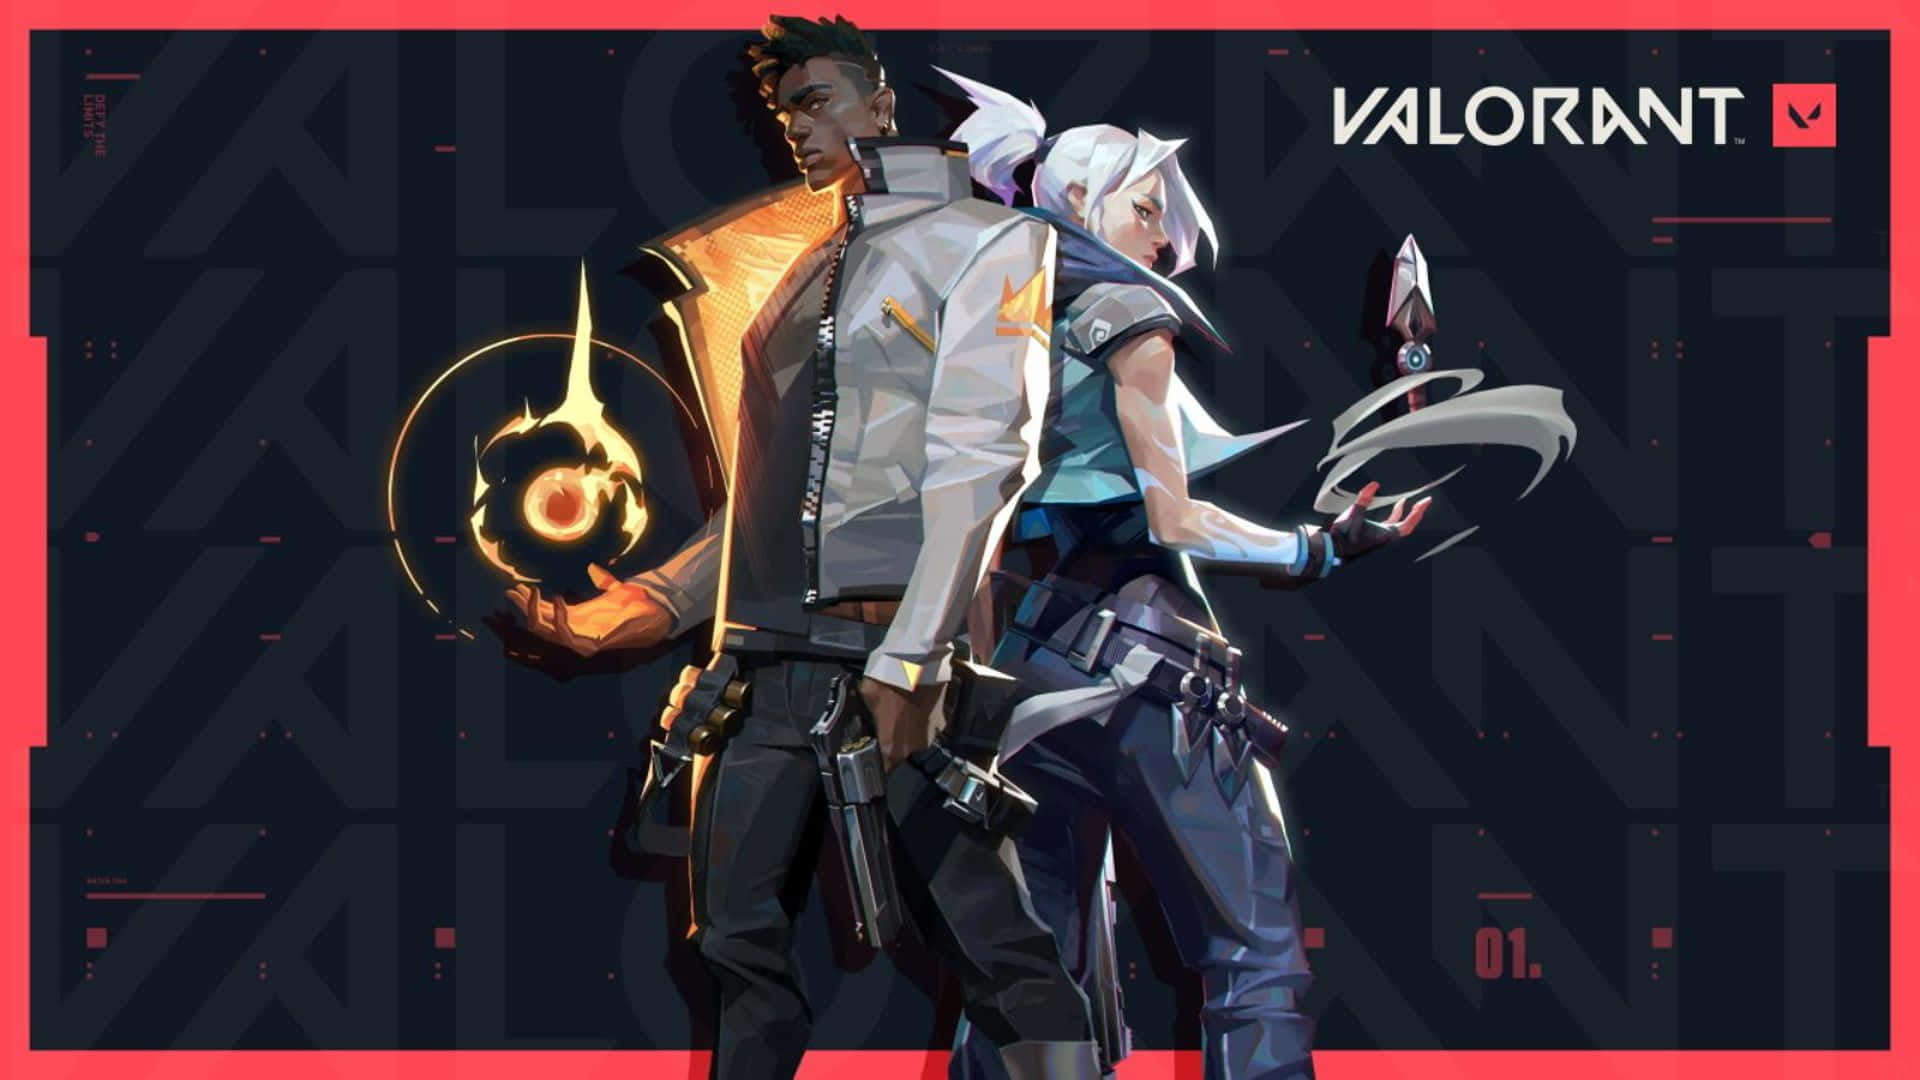 Exciting Valorant Agents Ready for Action Wallpaper